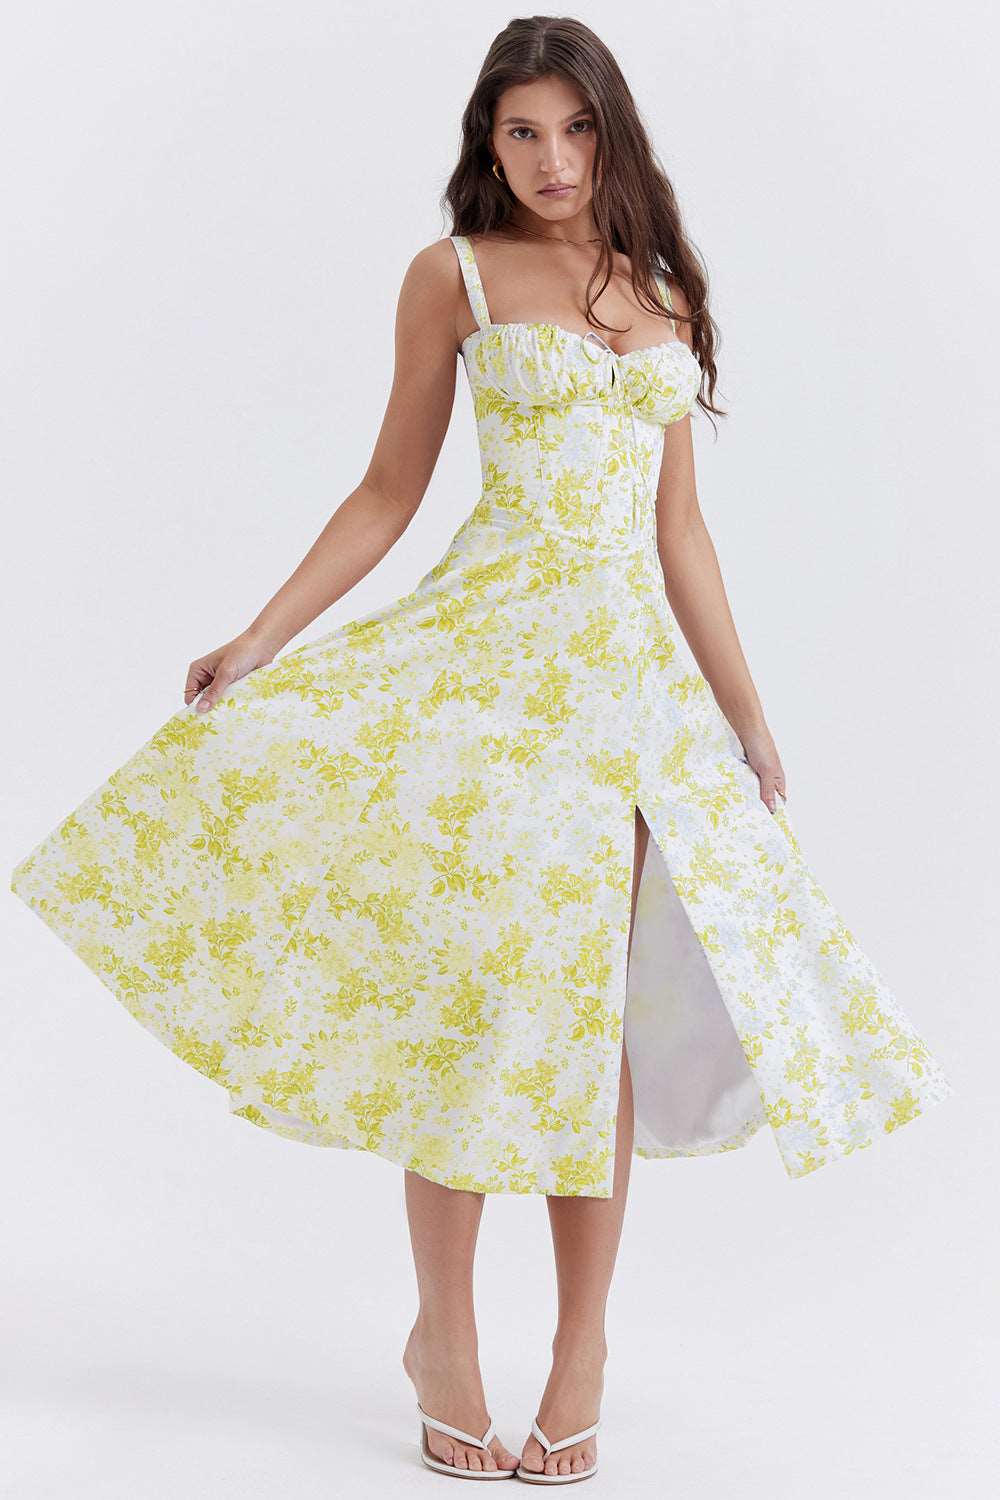 Women's Floral Print Dress With Straps